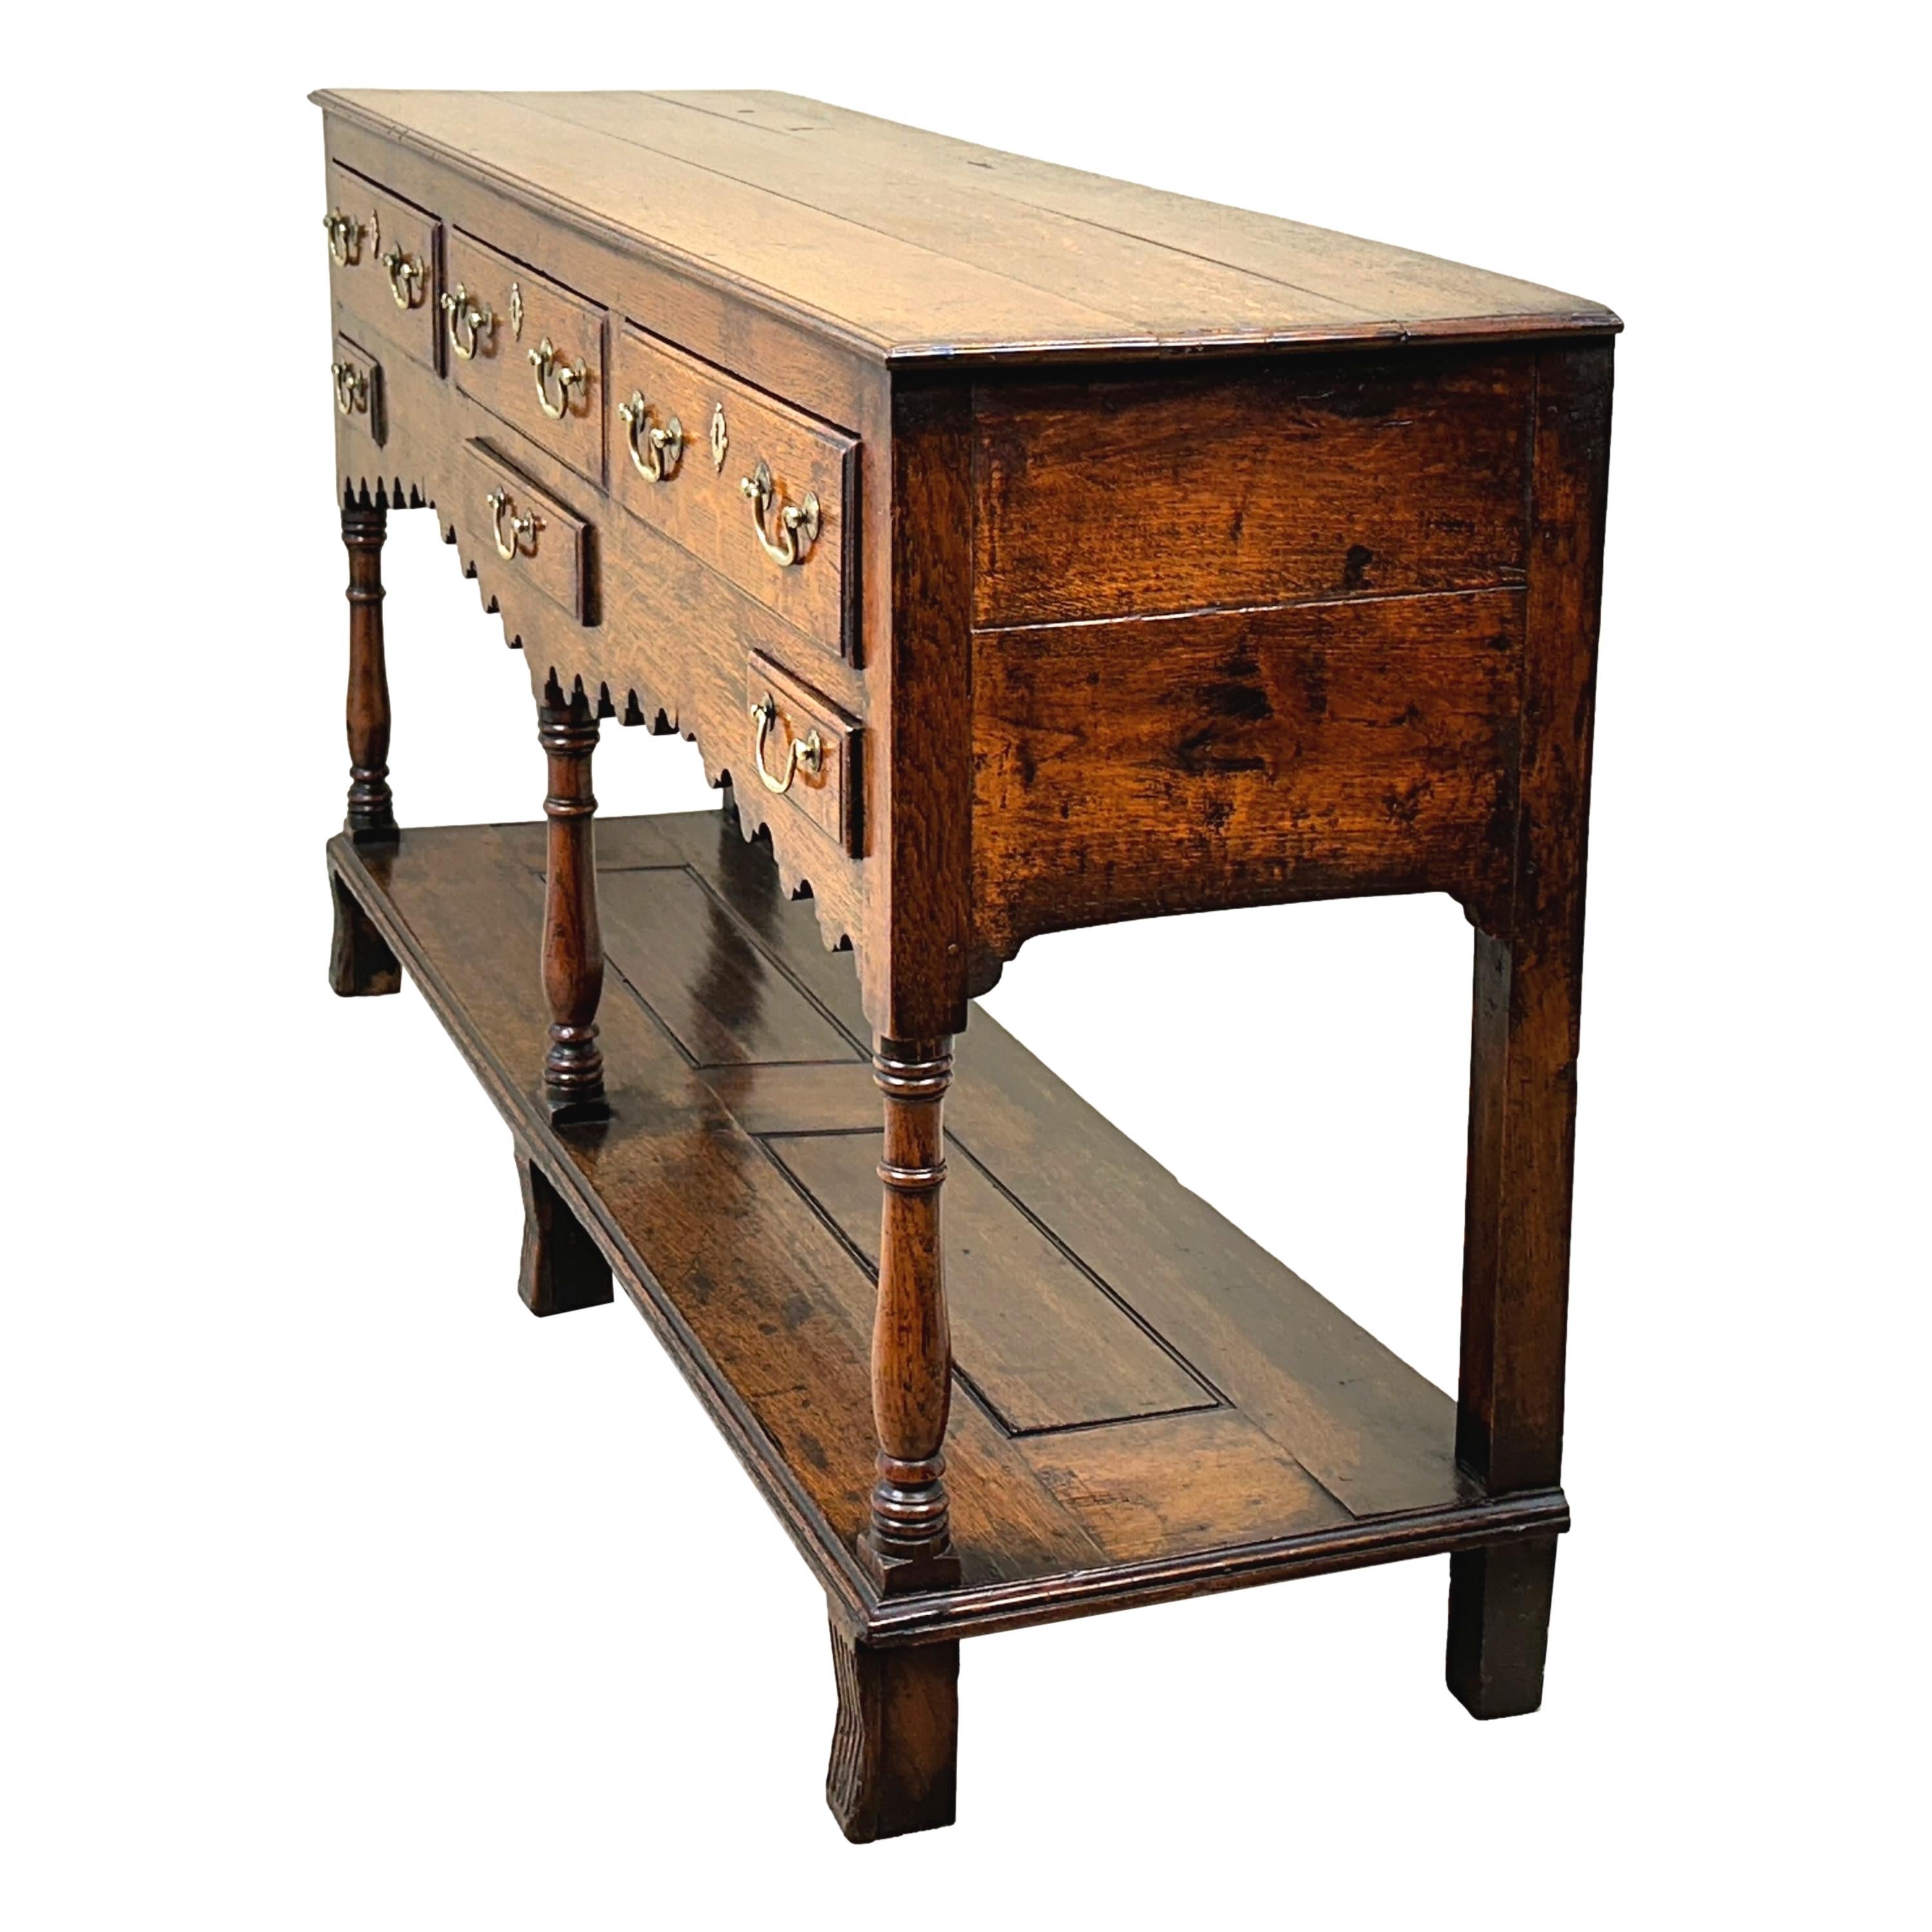 A Charming 18th Century, Georgian, Oak Dresser Base Sideboard Of Attractive Small Proportions, Having Rectangular Plank Top Over Six Drawers Retaining Original Brass Swan Neck Handles And Elegant Shaped Frieze, Raised On Baluster Turned Upright